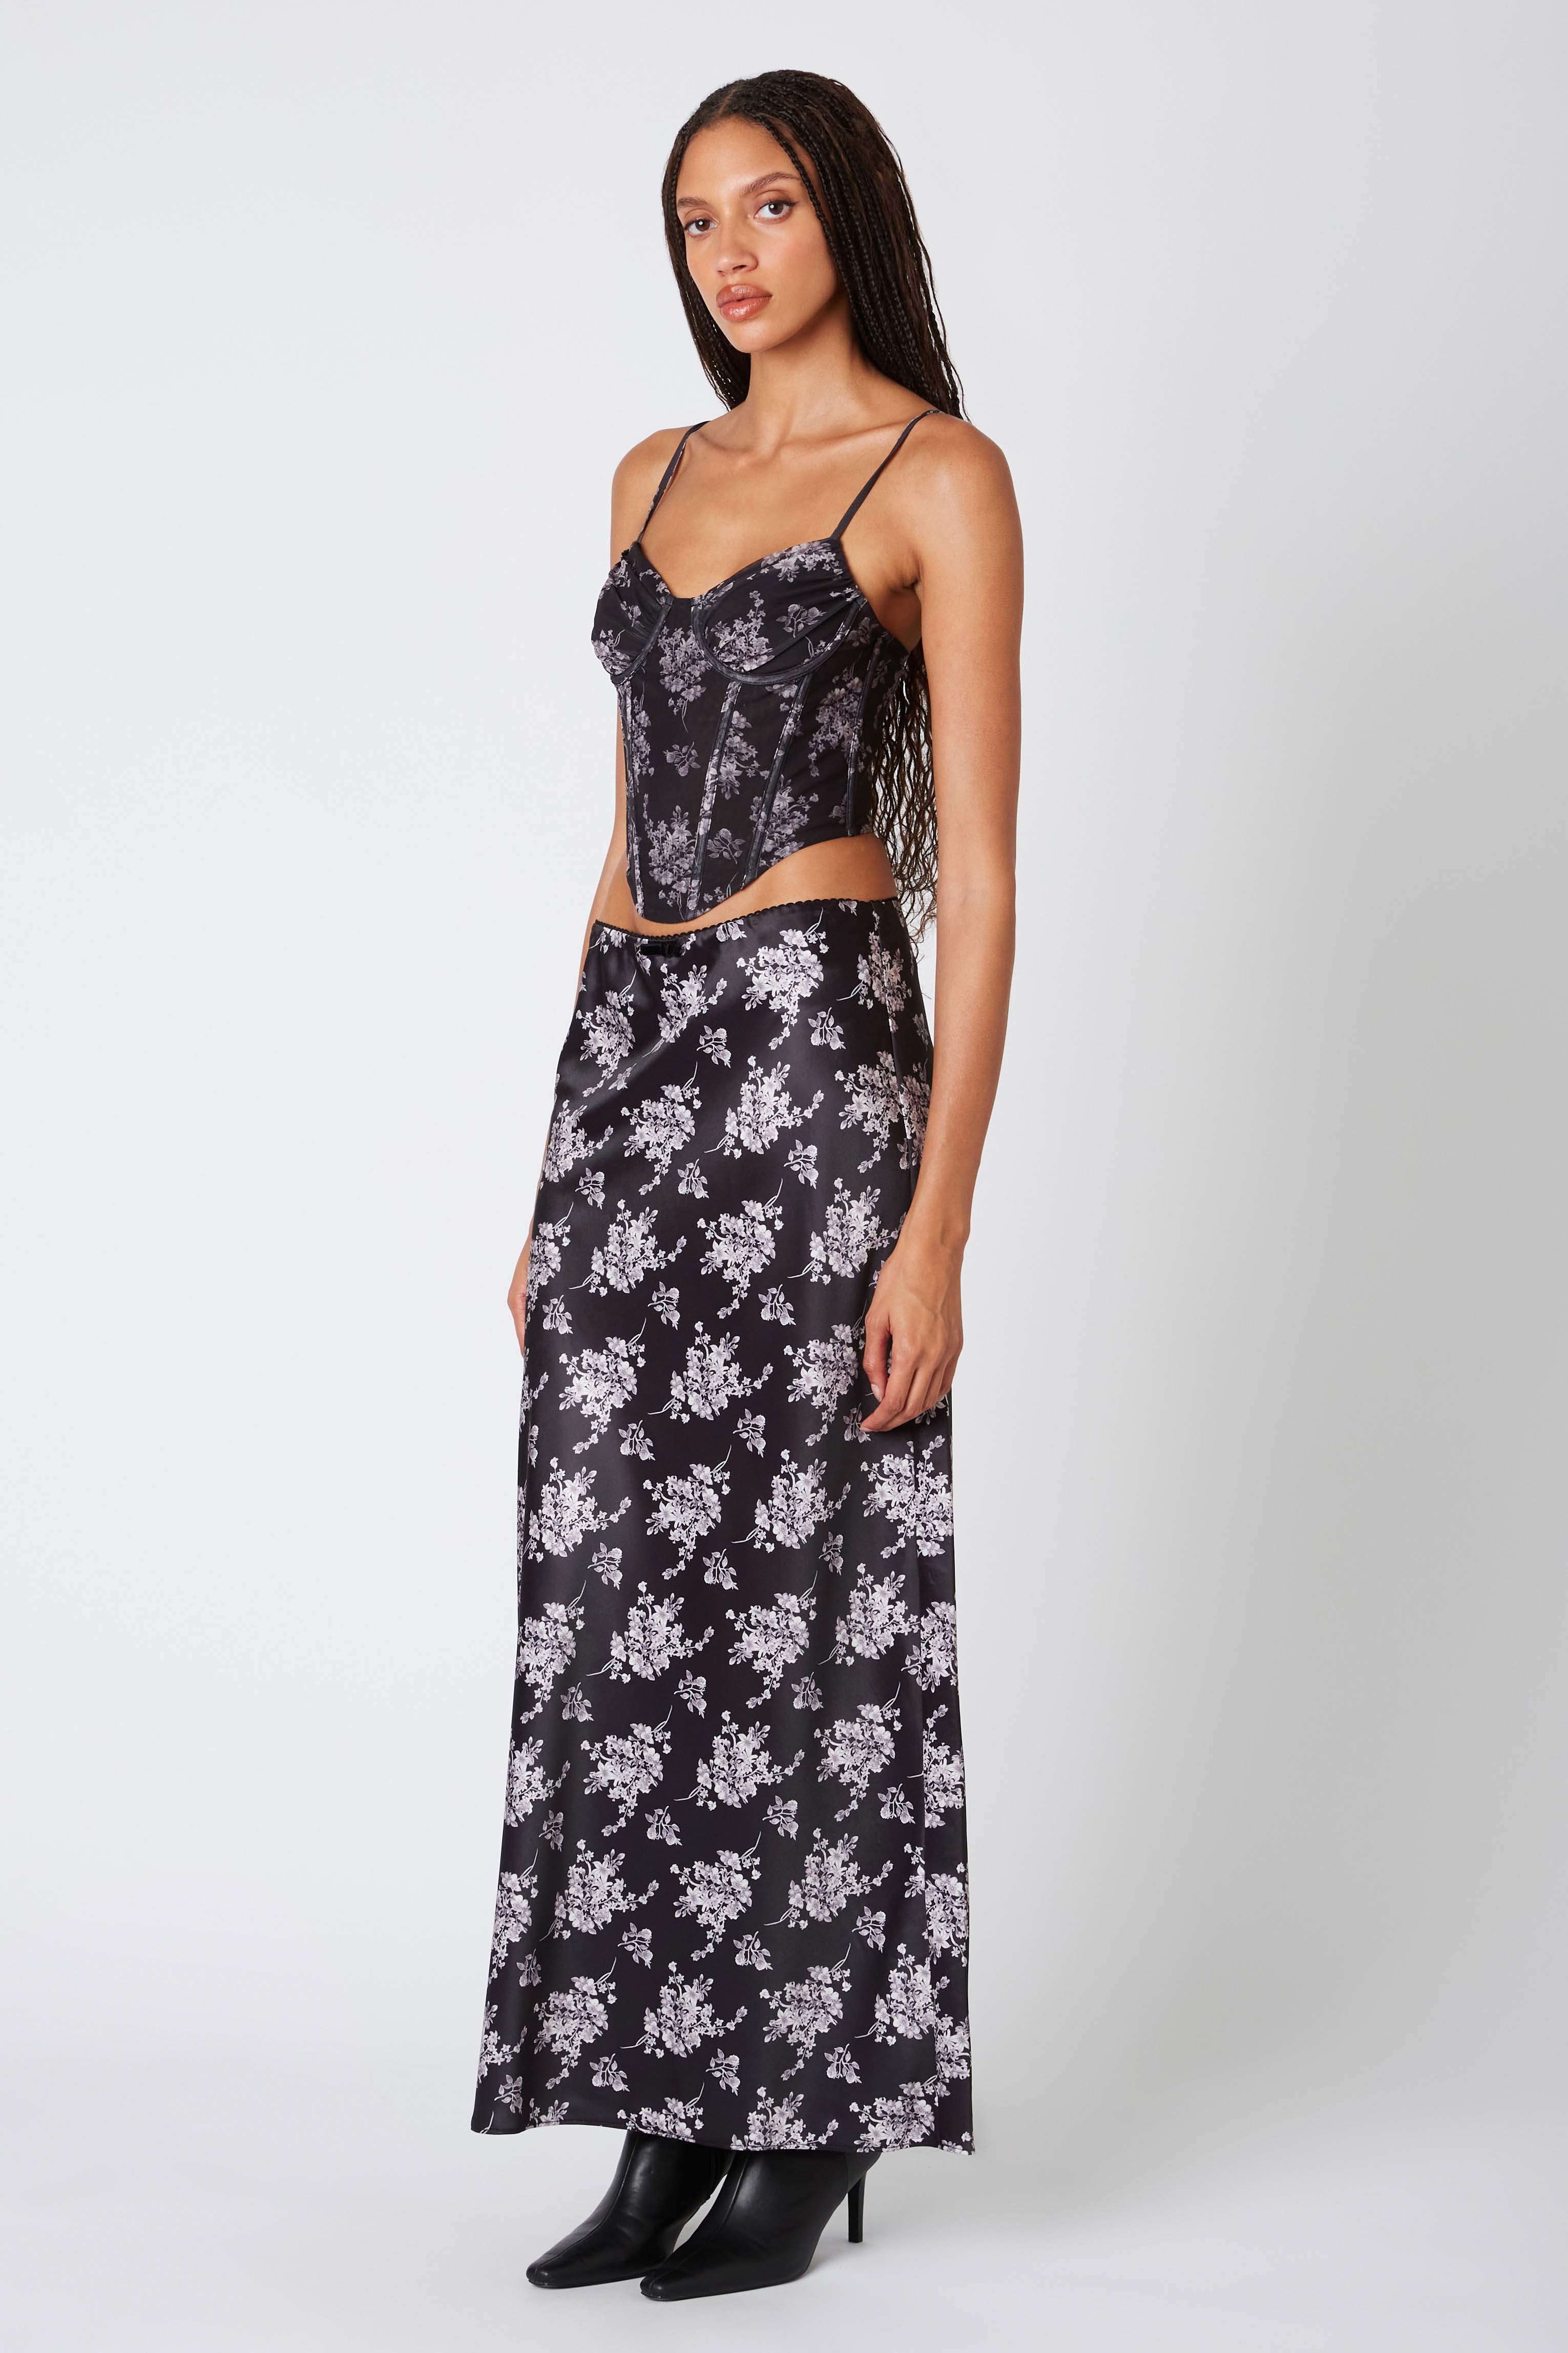 Floral Maxi Skirt in Black Side View